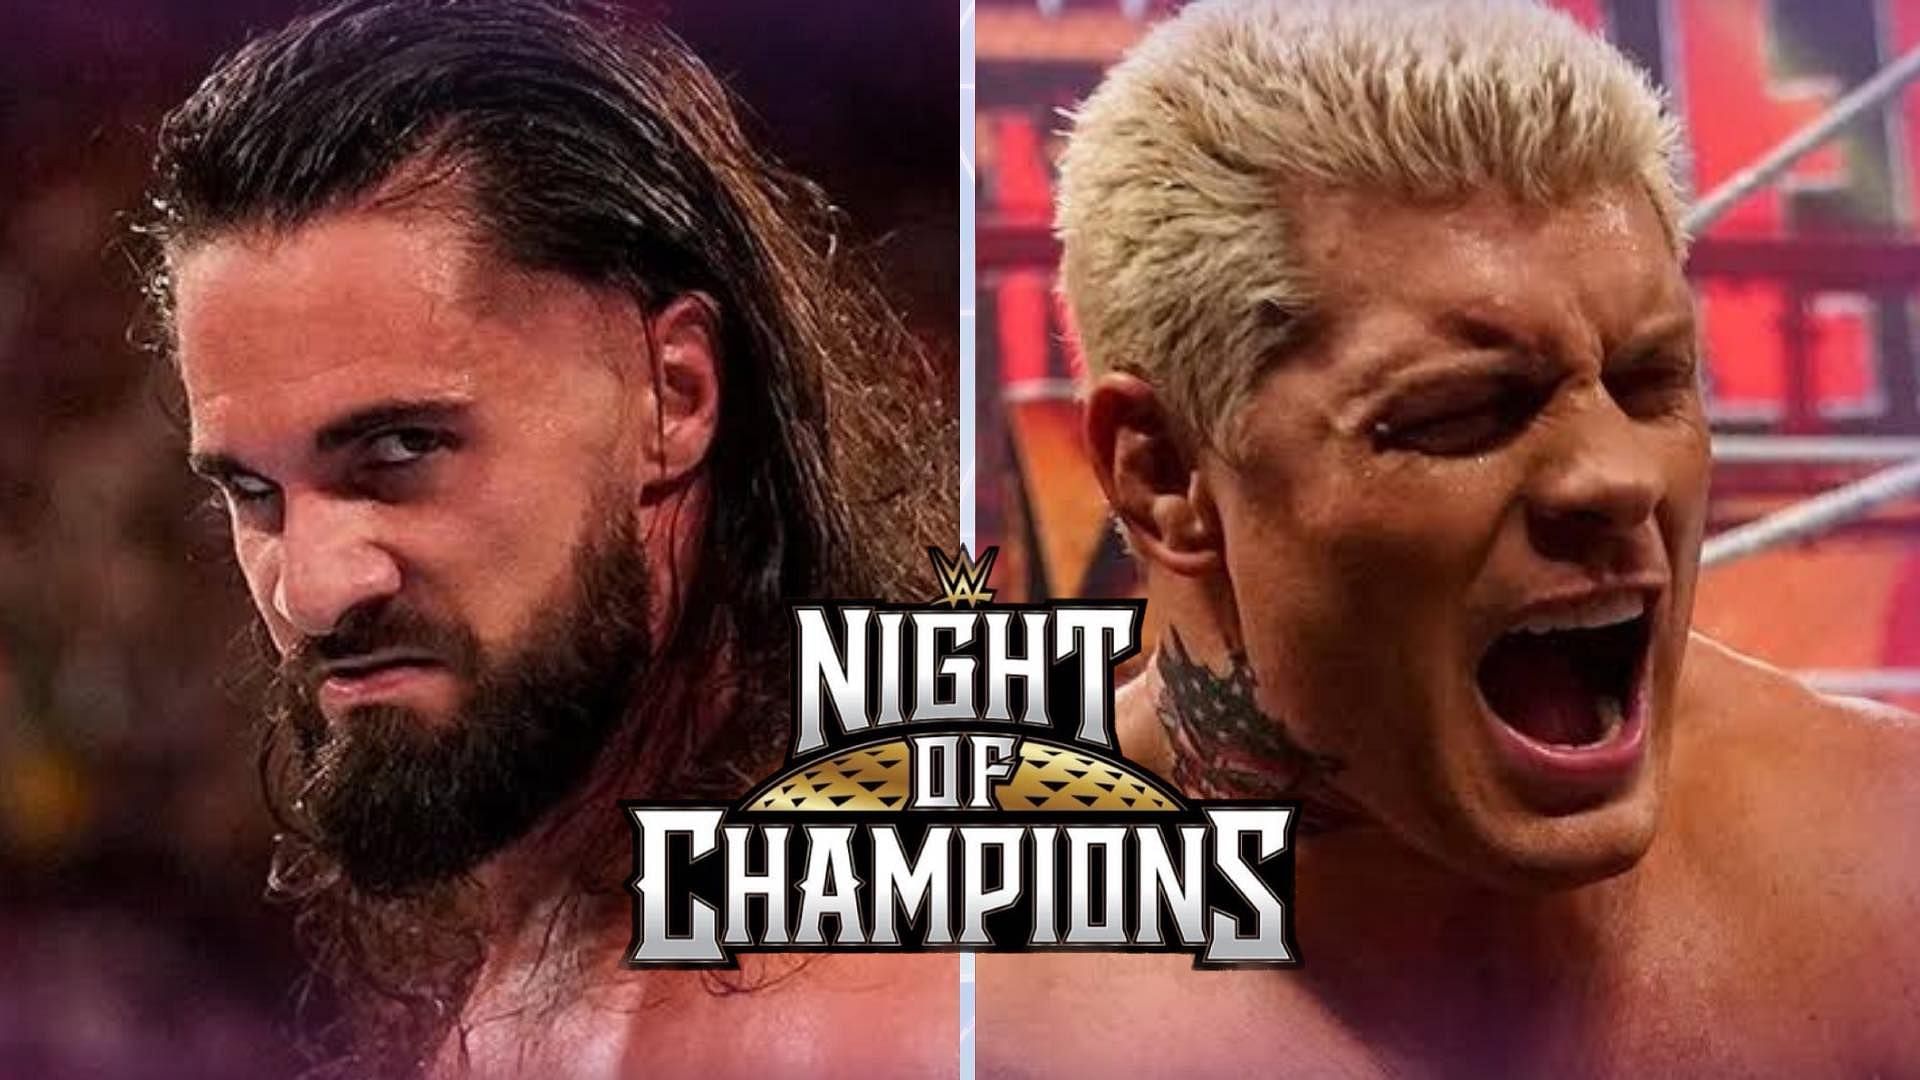 WWE Night of Champions is just a handful of hours away